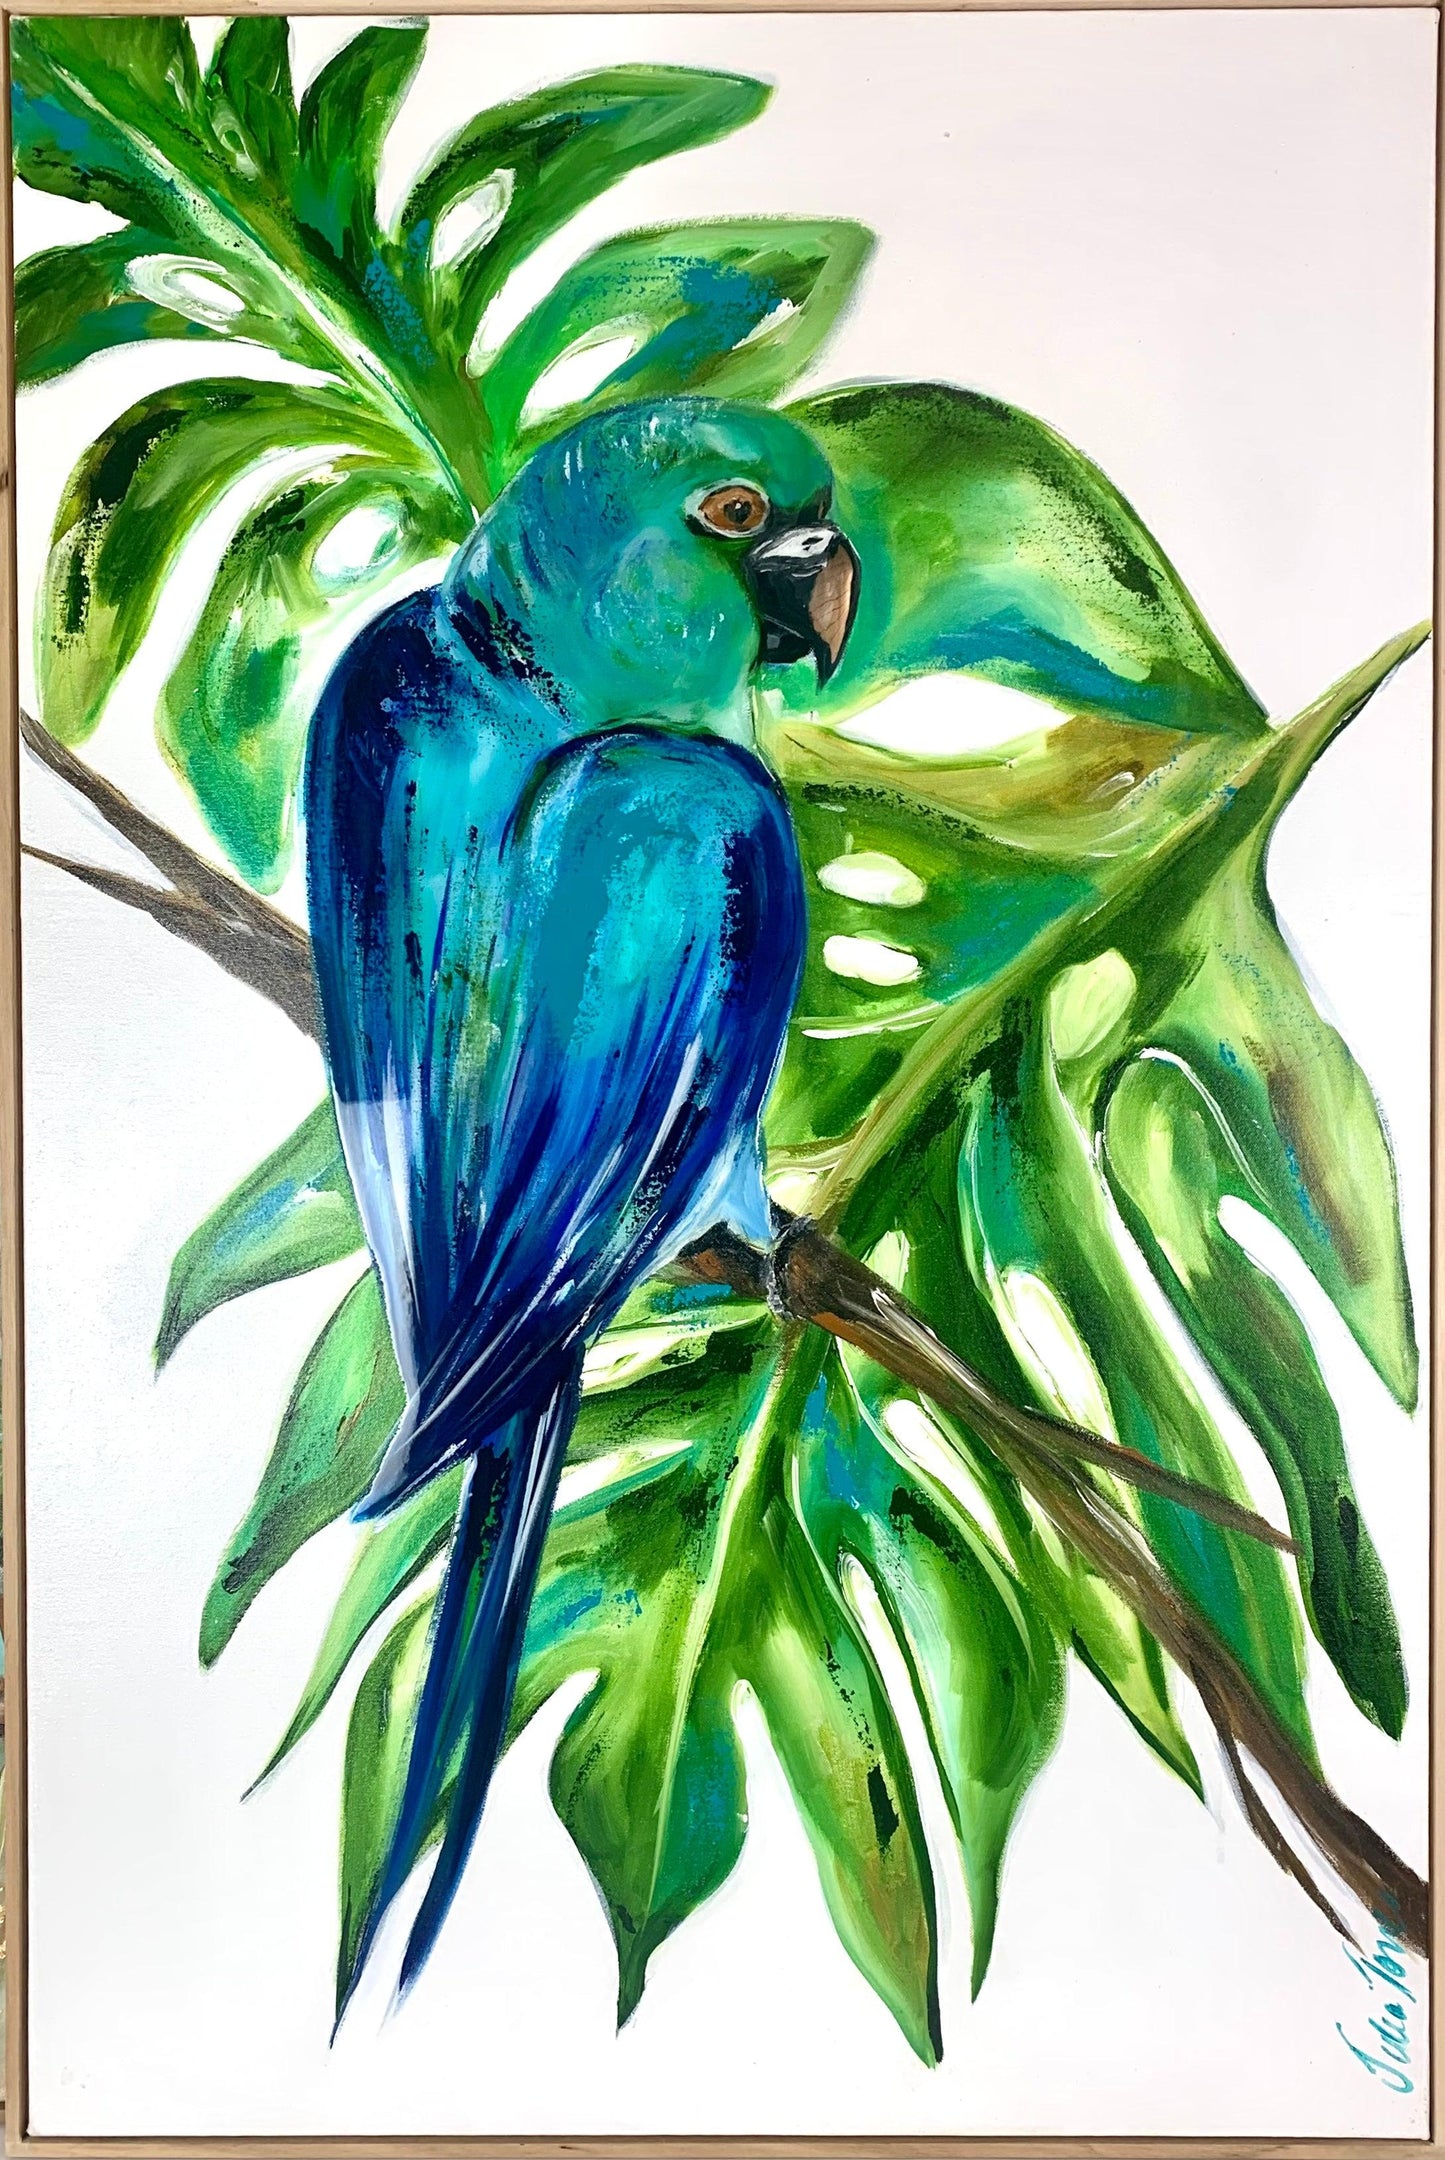 Blue Beauty - 1.2 x 800 - Original Artwork - Available by Commission